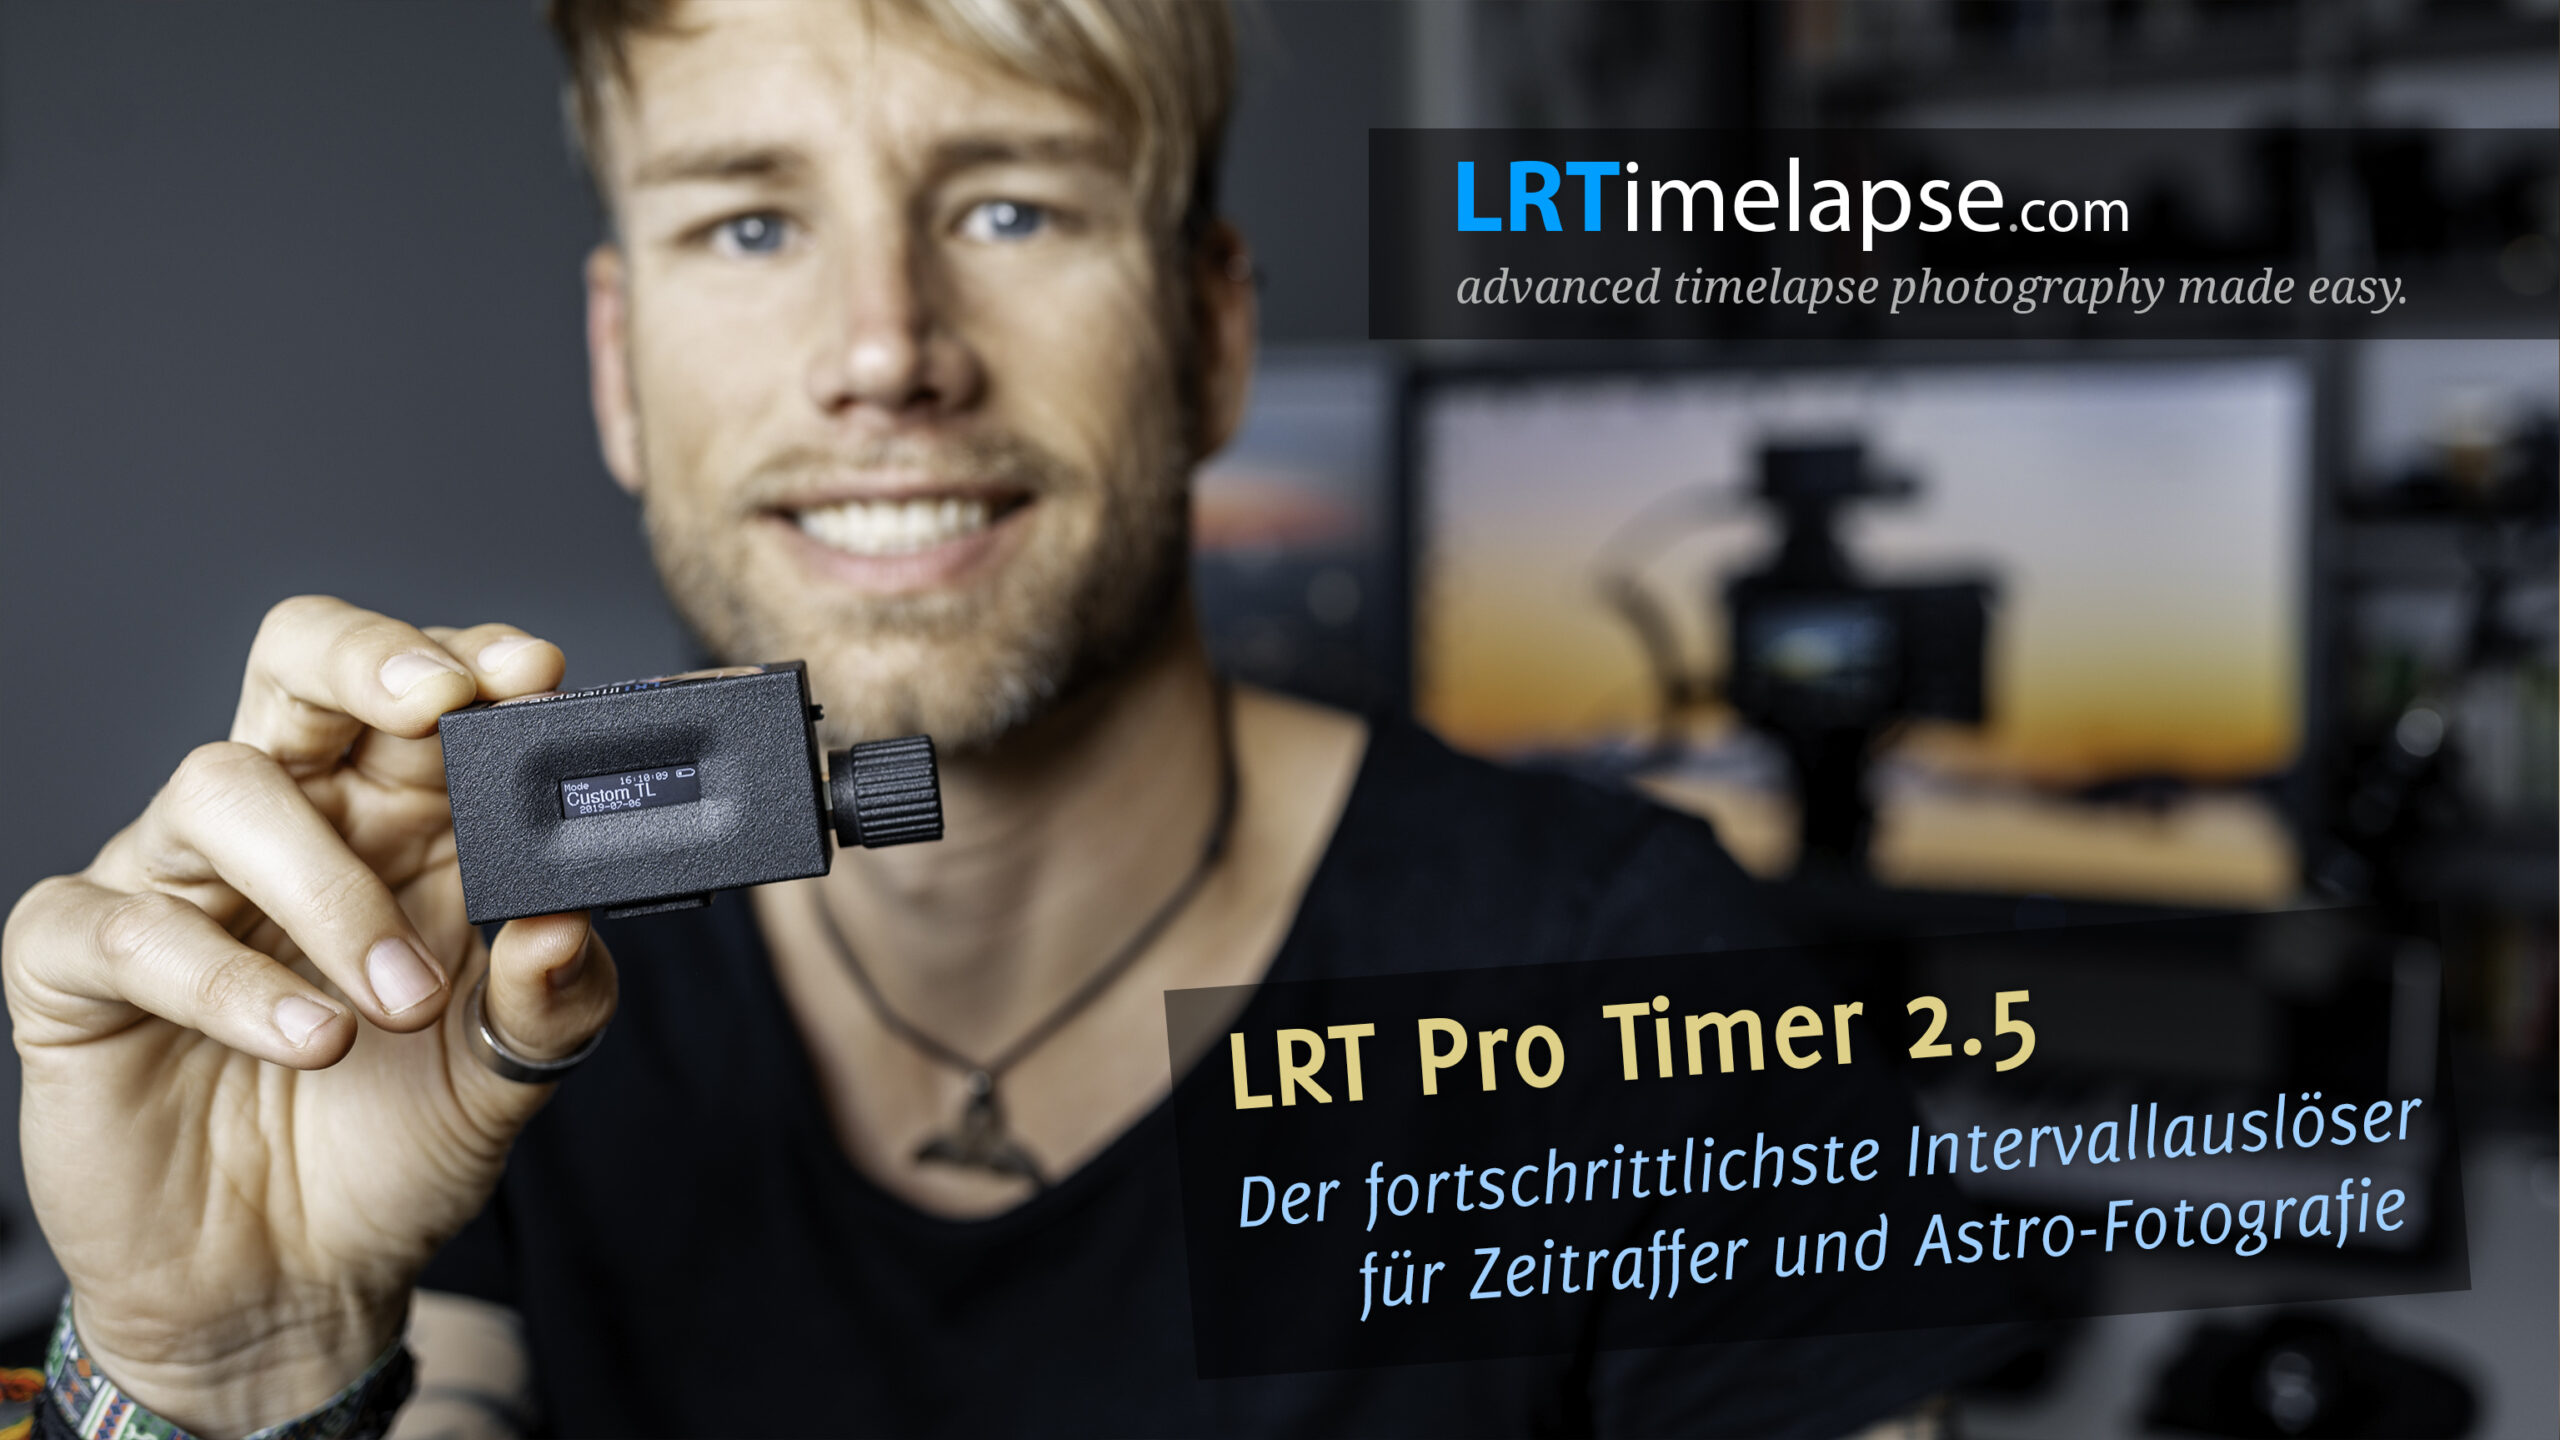 download the last version for ios LRTimelapse Pro 6.5.2